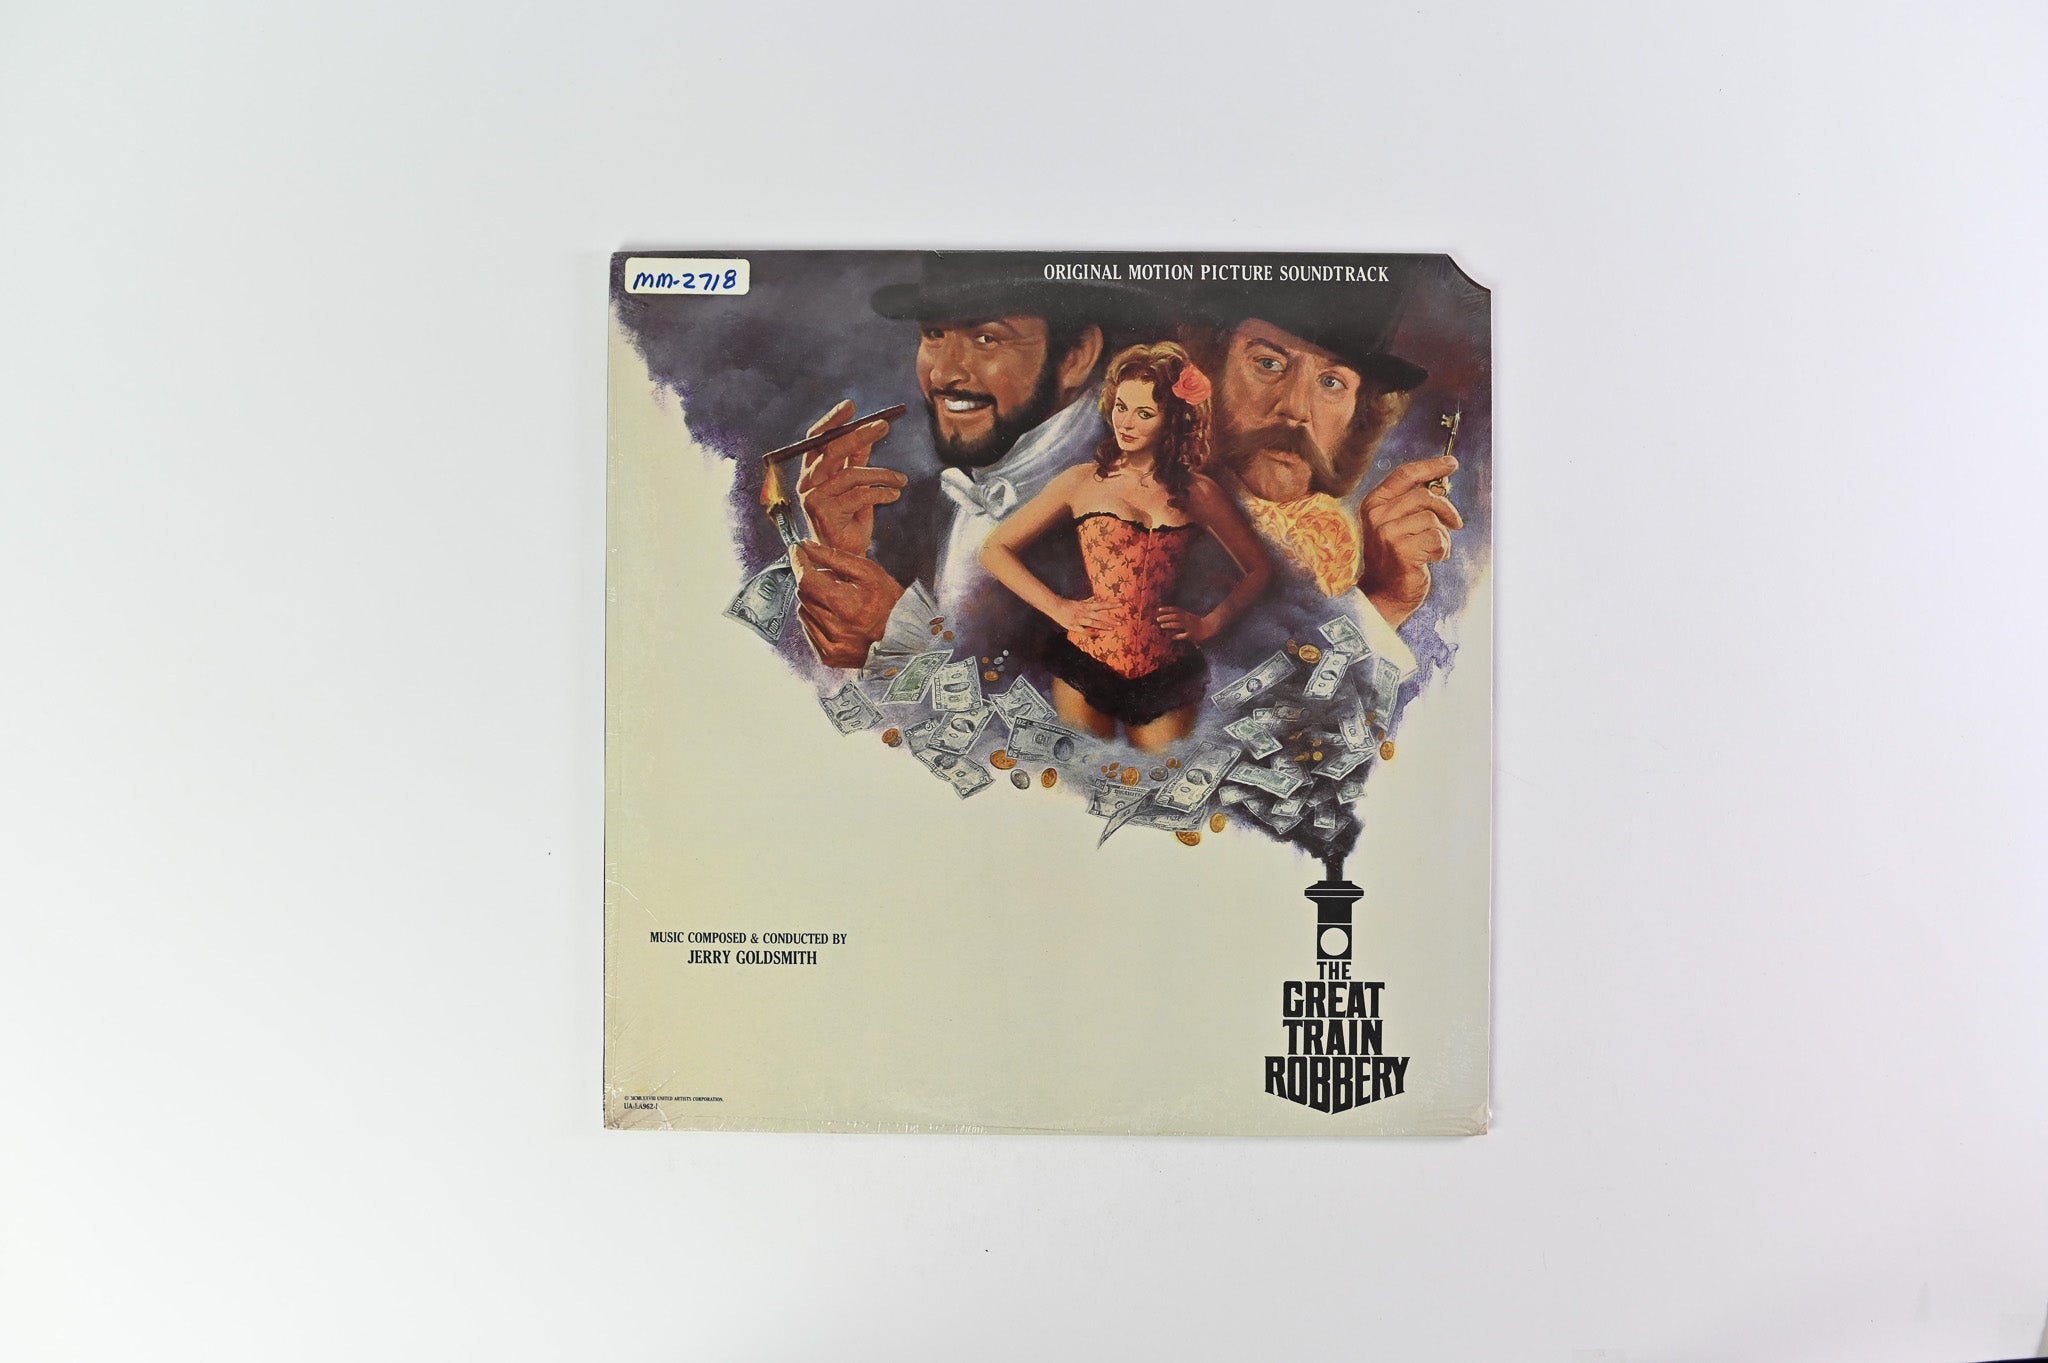 Jerry Goldsmith - The Great Train Robbery (Original Motion Picture Soundtrack) on United Artists Records Sealed